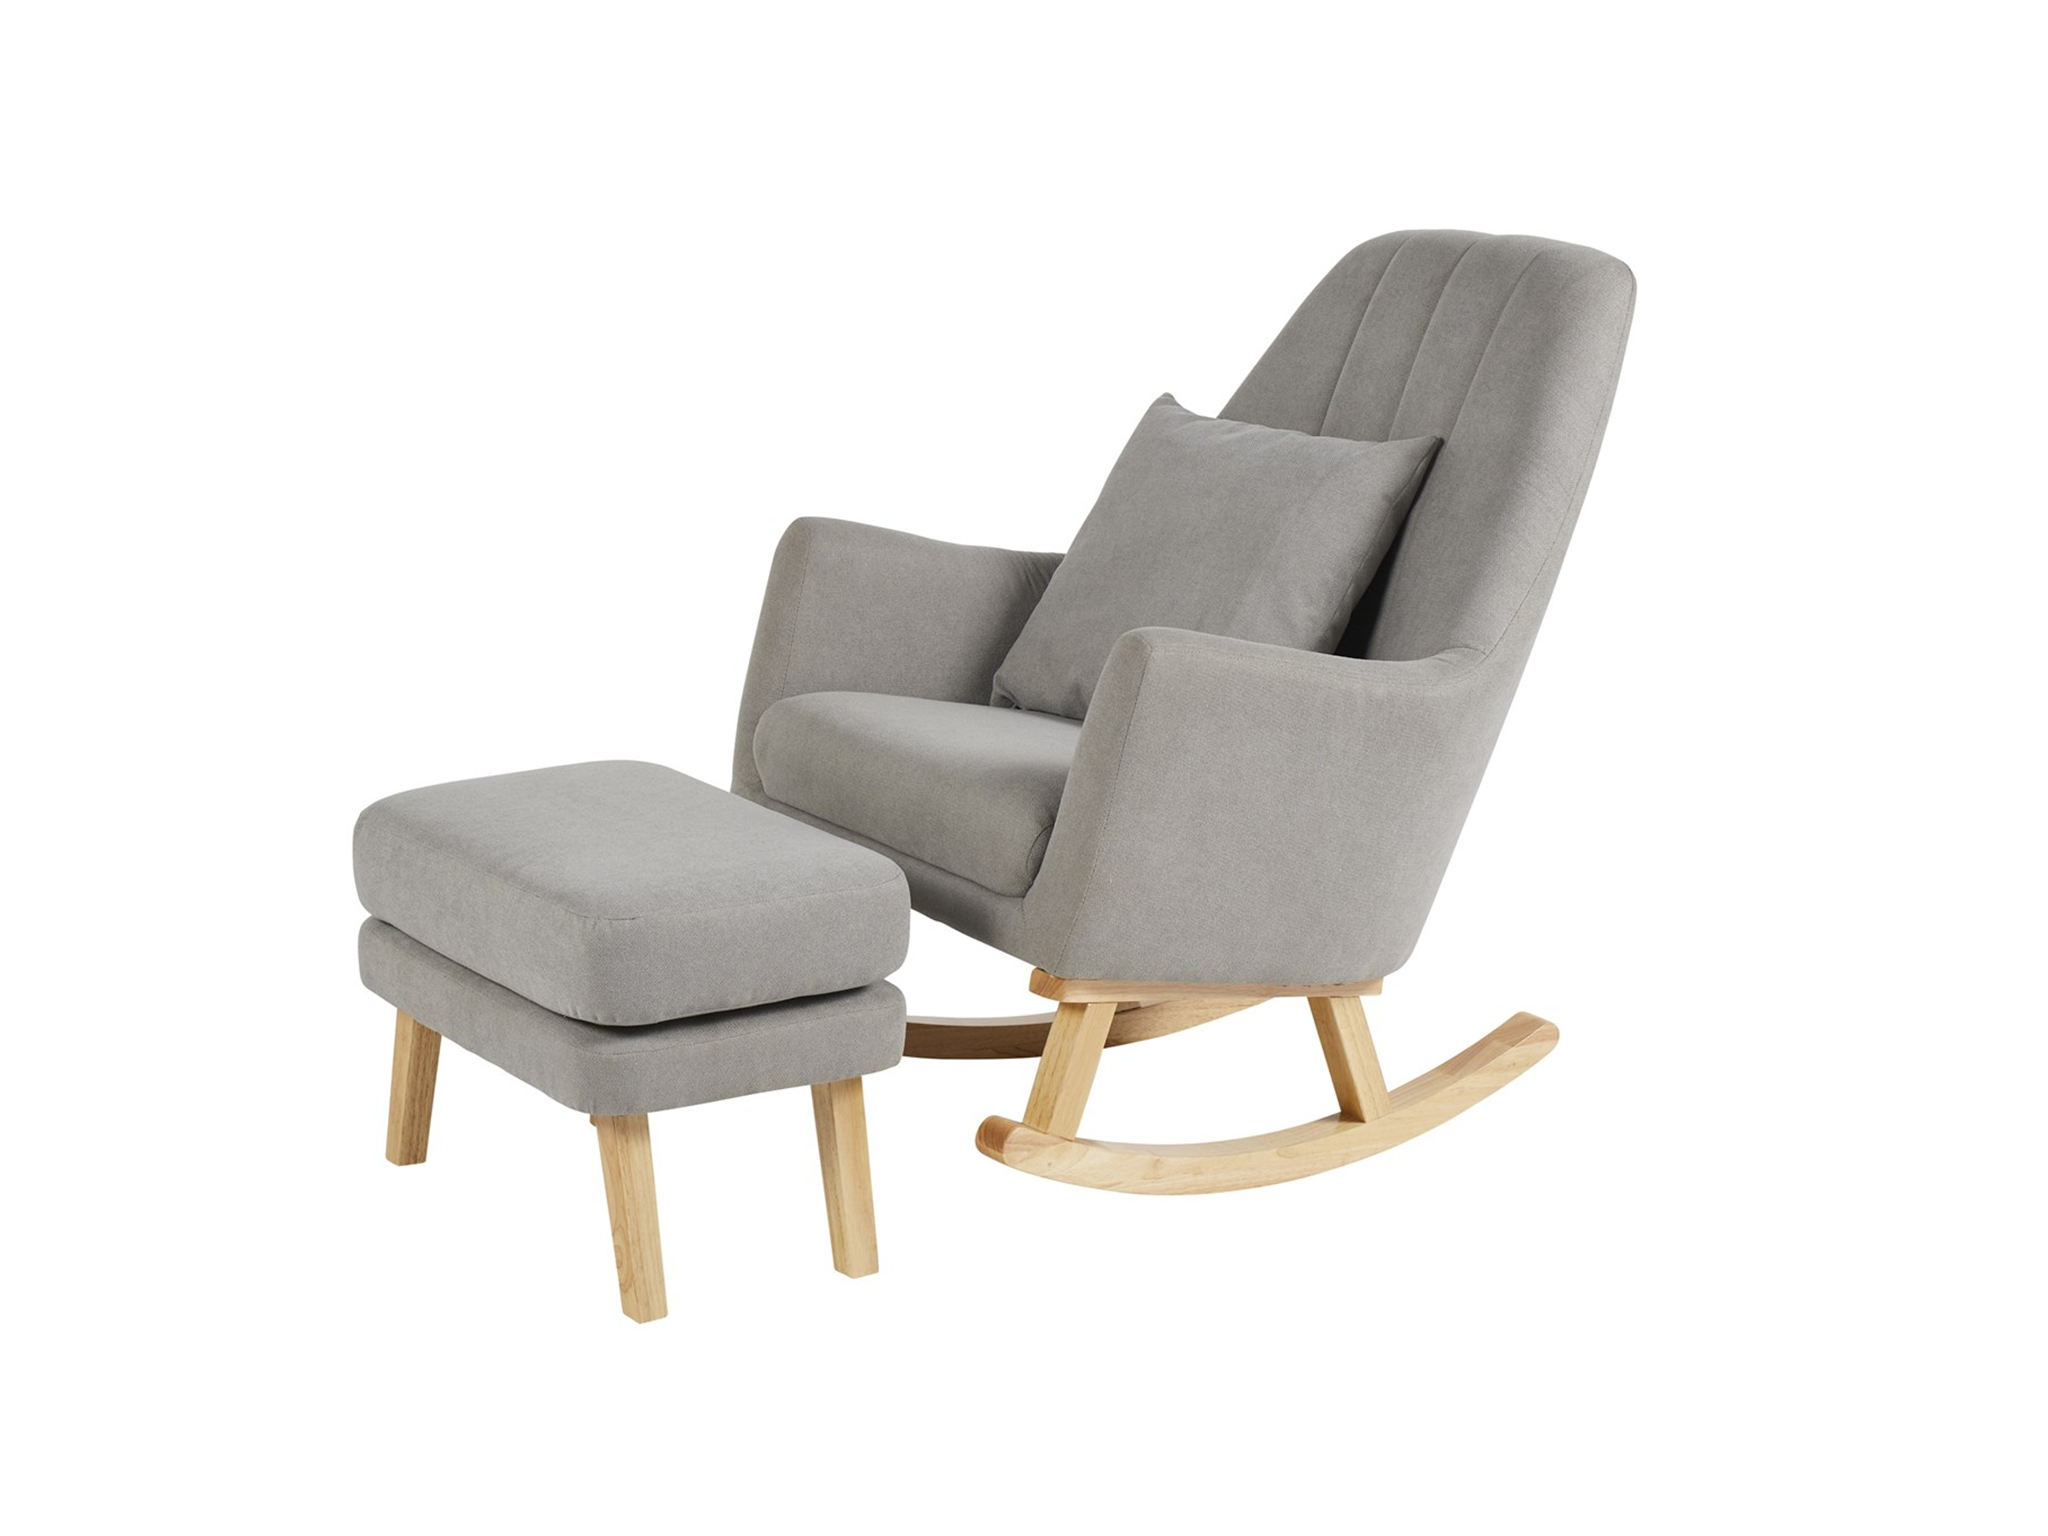 Eden deluxe nursery chair and stool